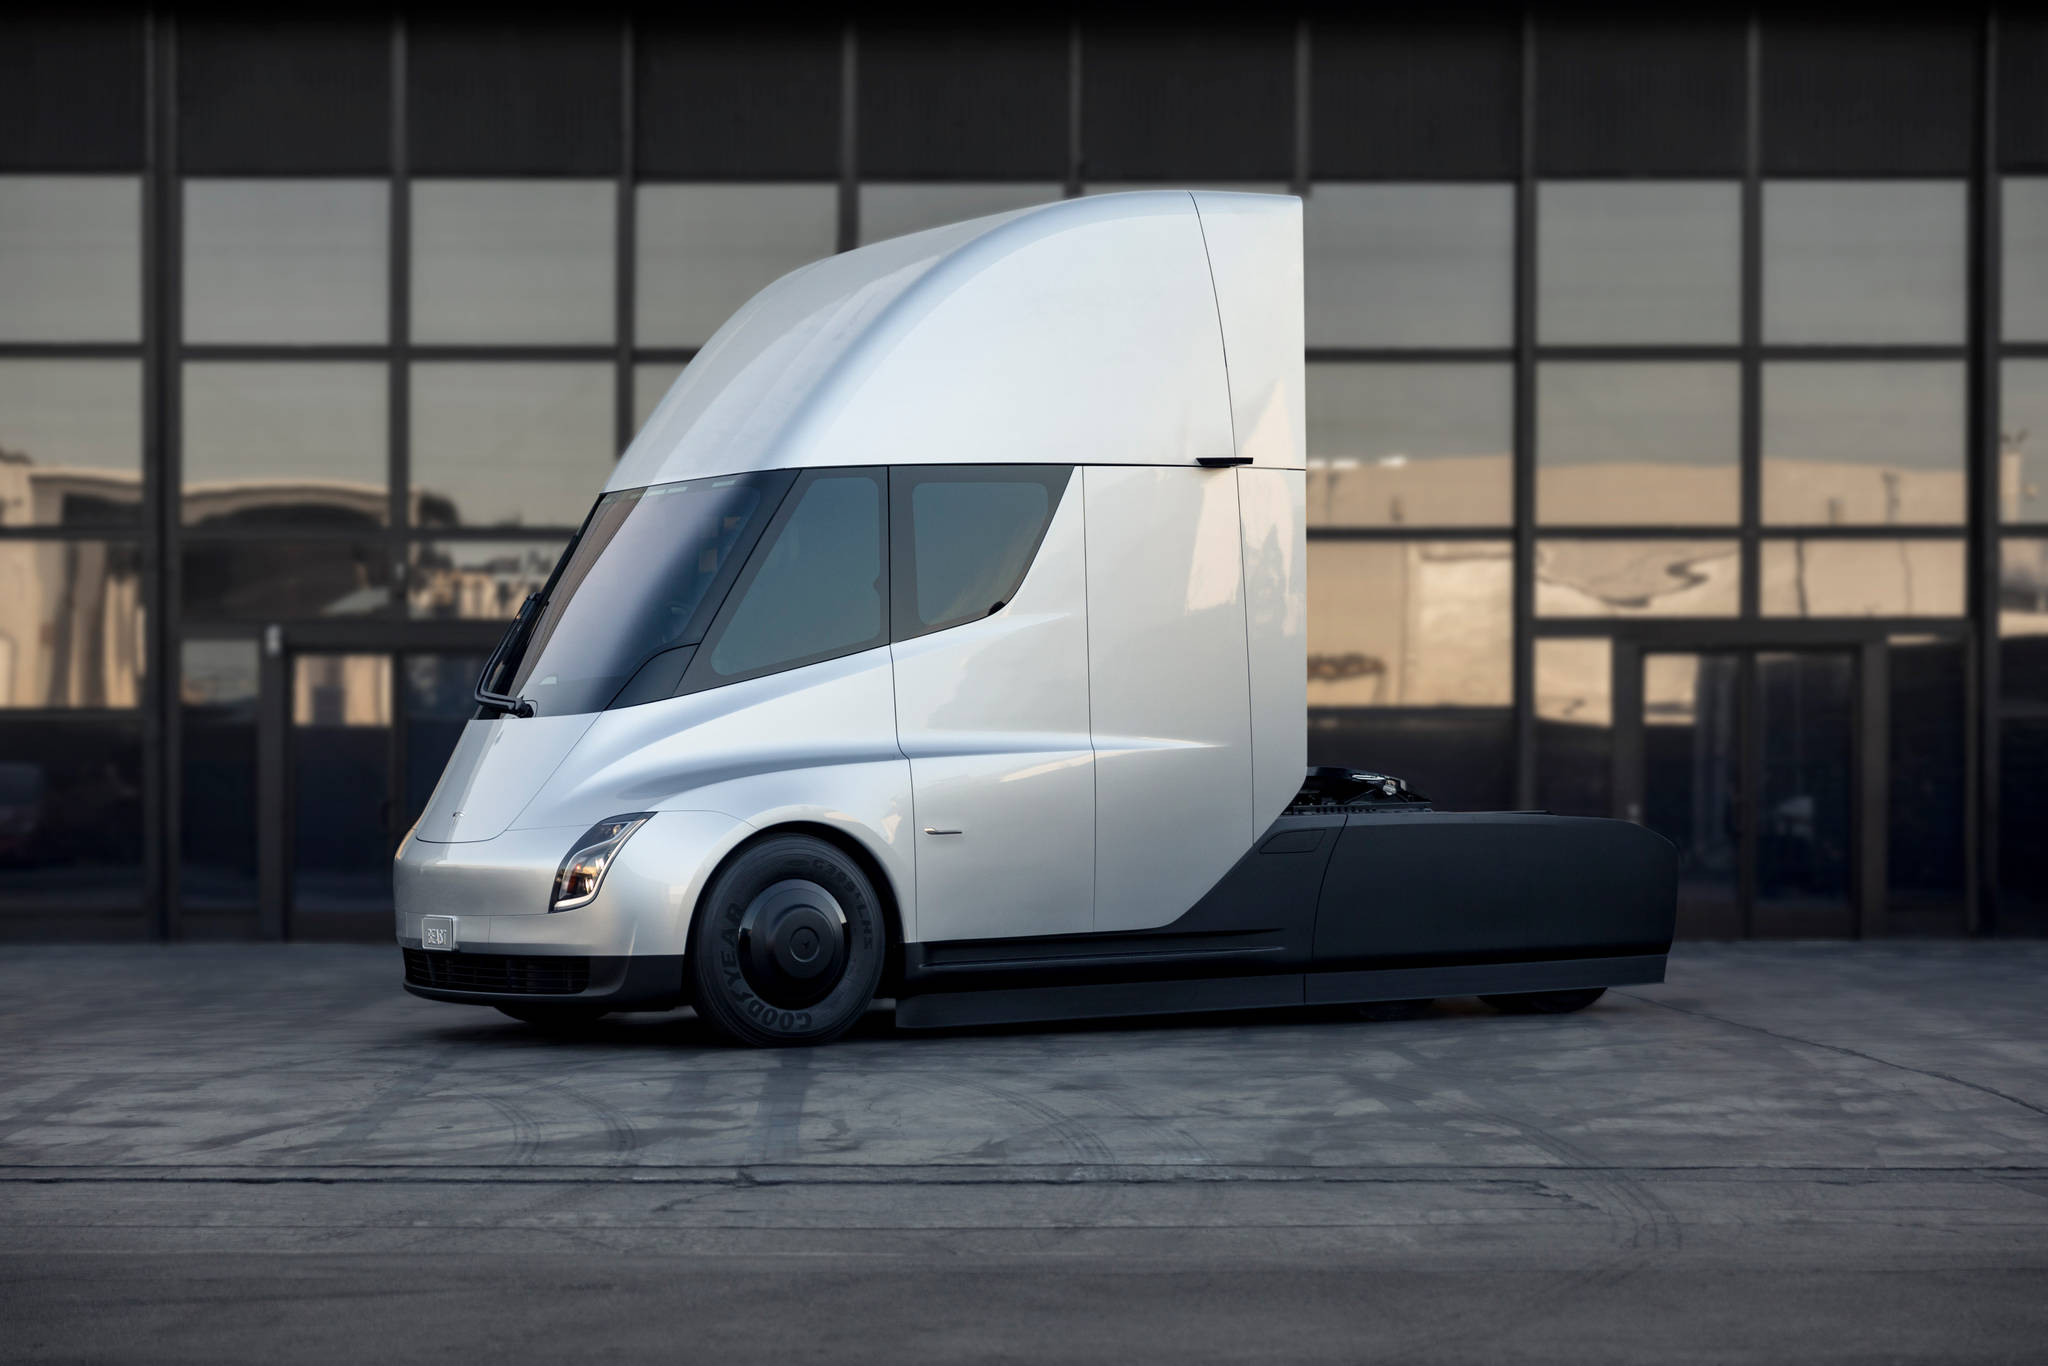 Mosaic Forest Management will be testing out Tesla semis as part of a pilot project. Photo courtesy of Tesla Inc.